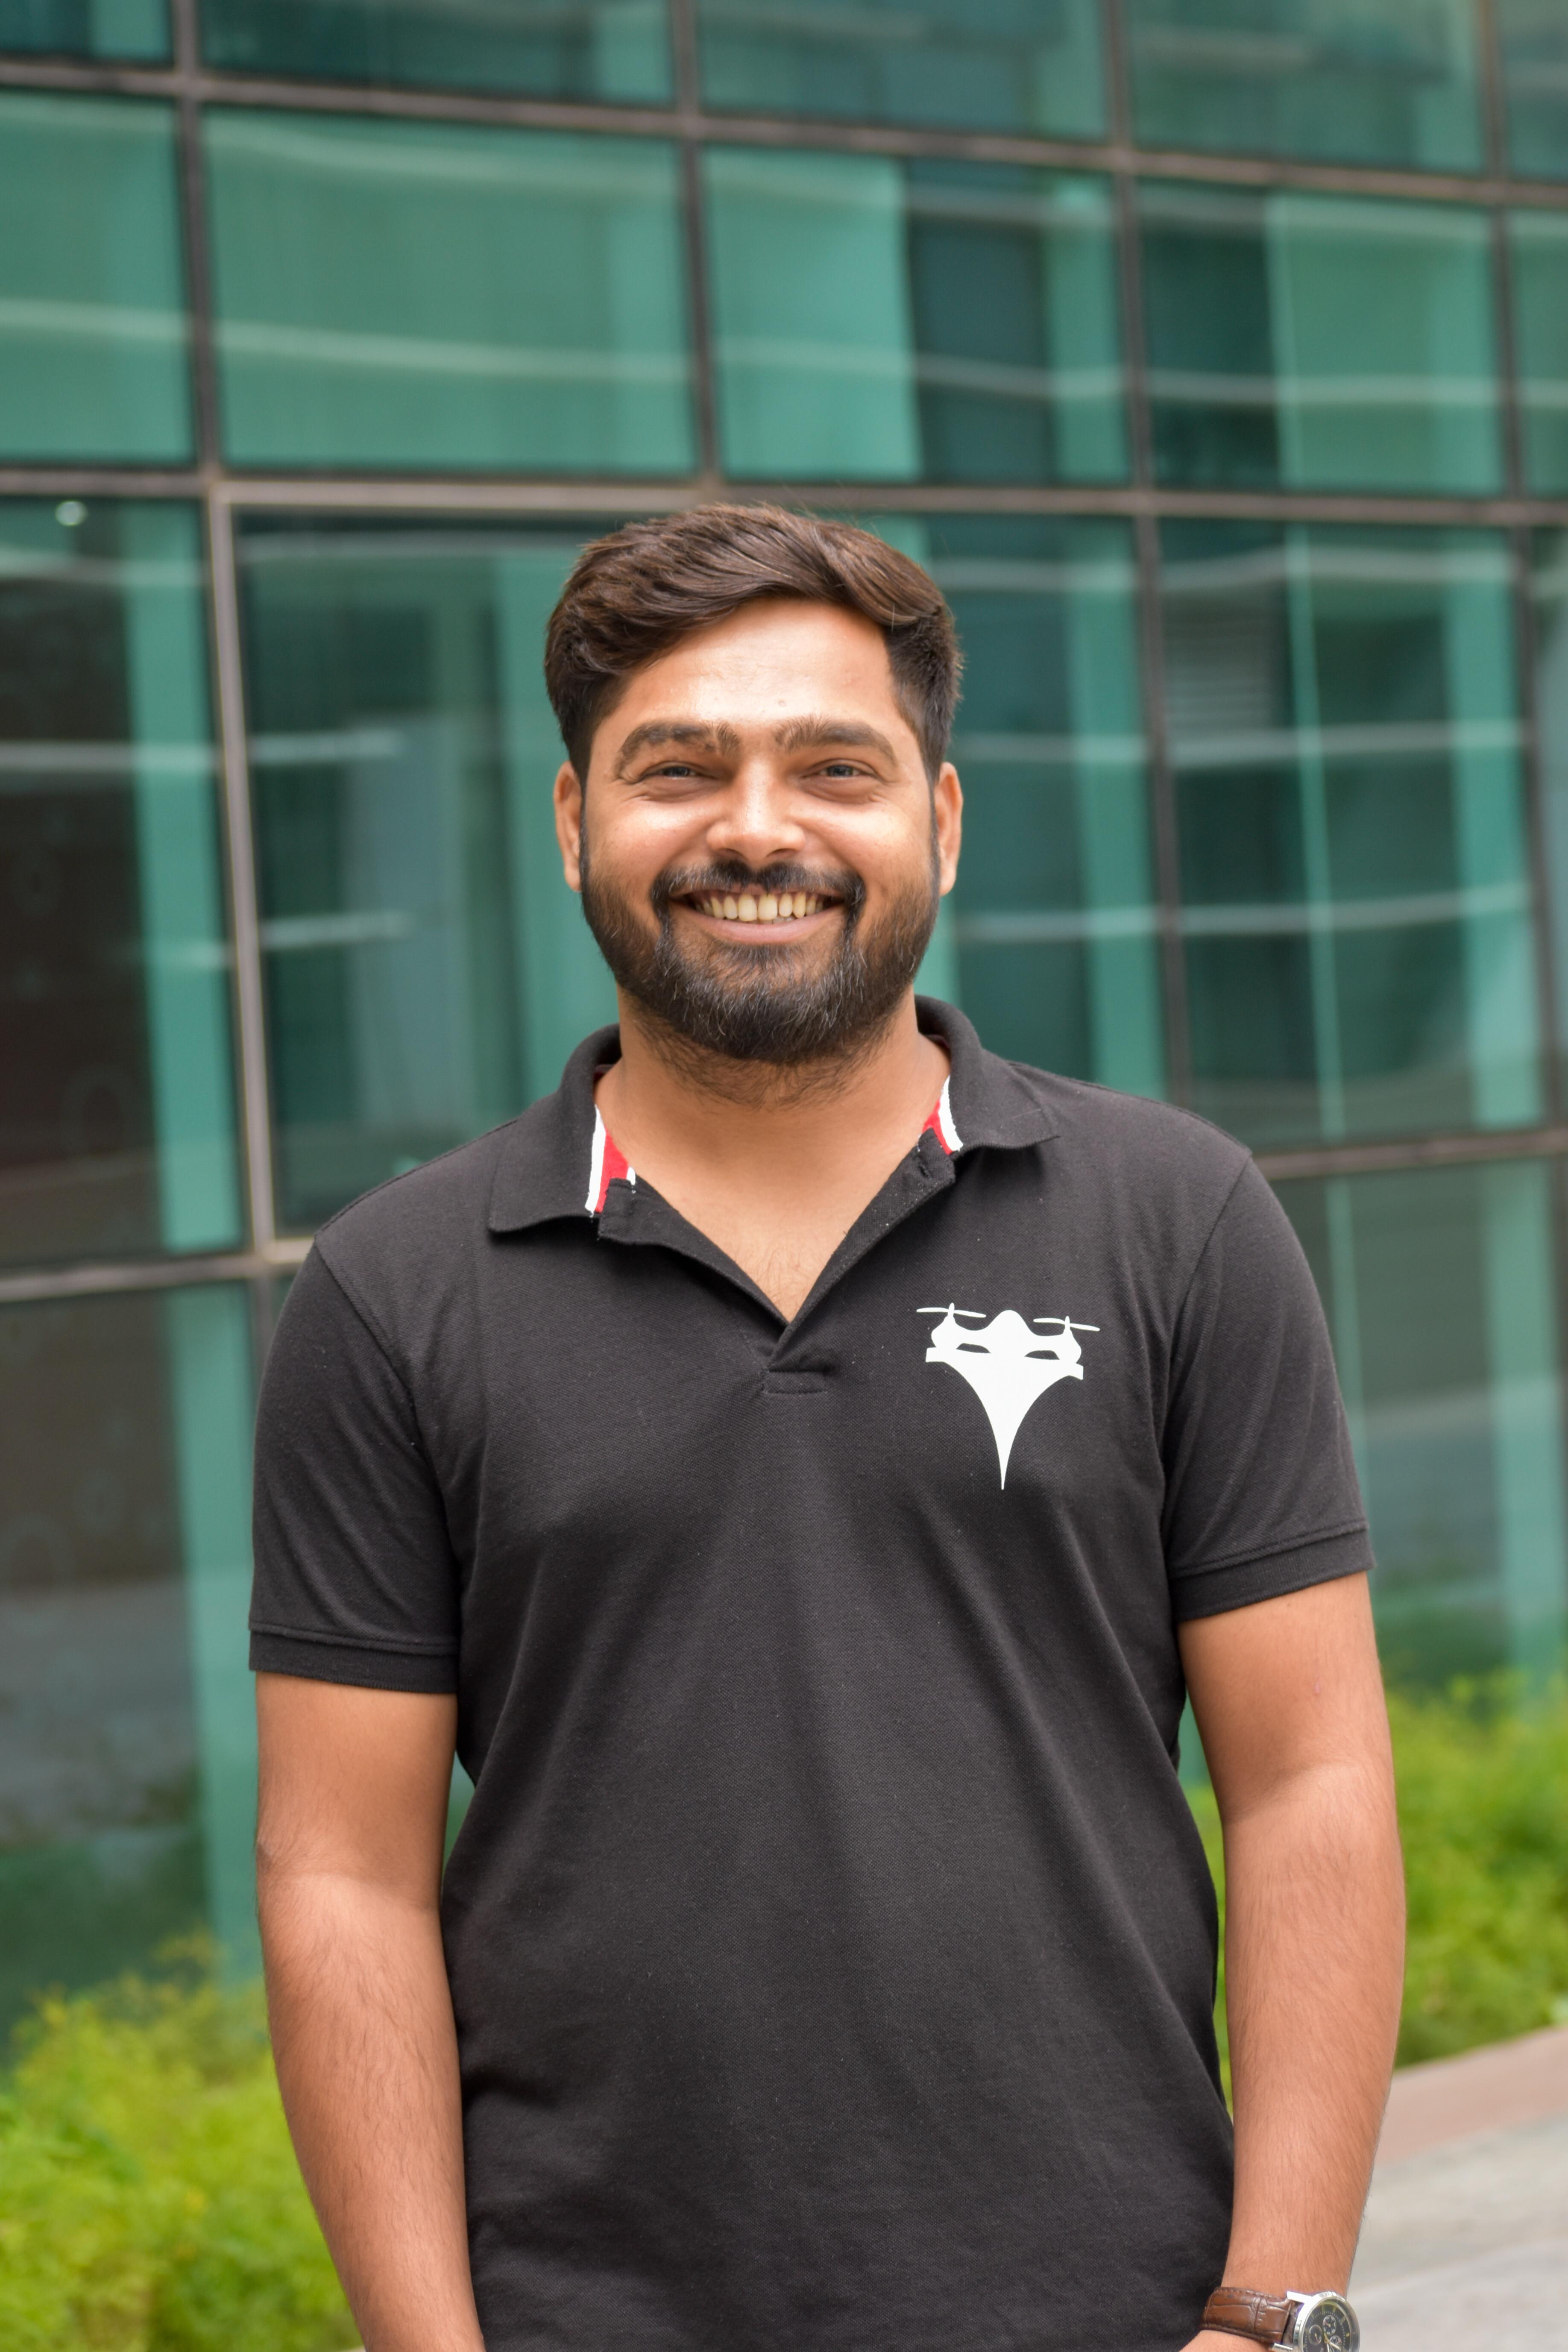 Rimanshu Pandey is the Co-Founder & CTO, TSAW Drones fo TSAW drones.